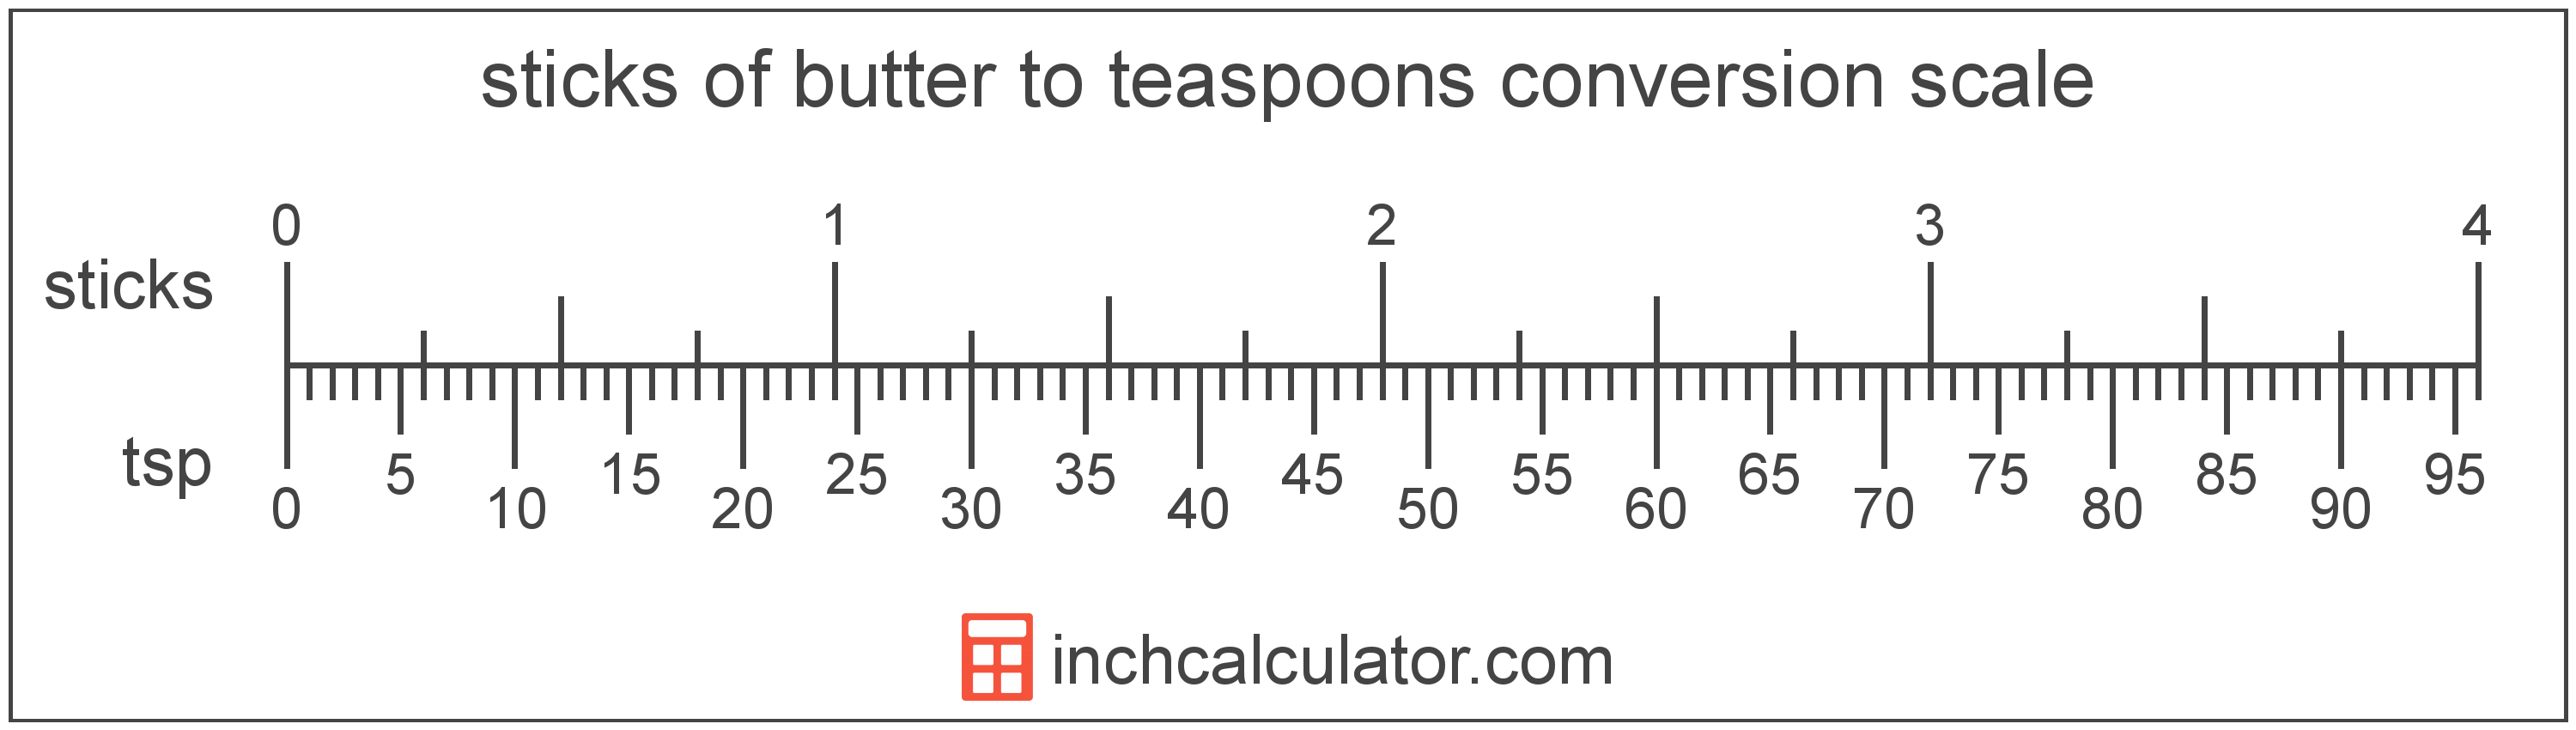 conversion scale showing sticks of butter and equivalent teaspoons butter values